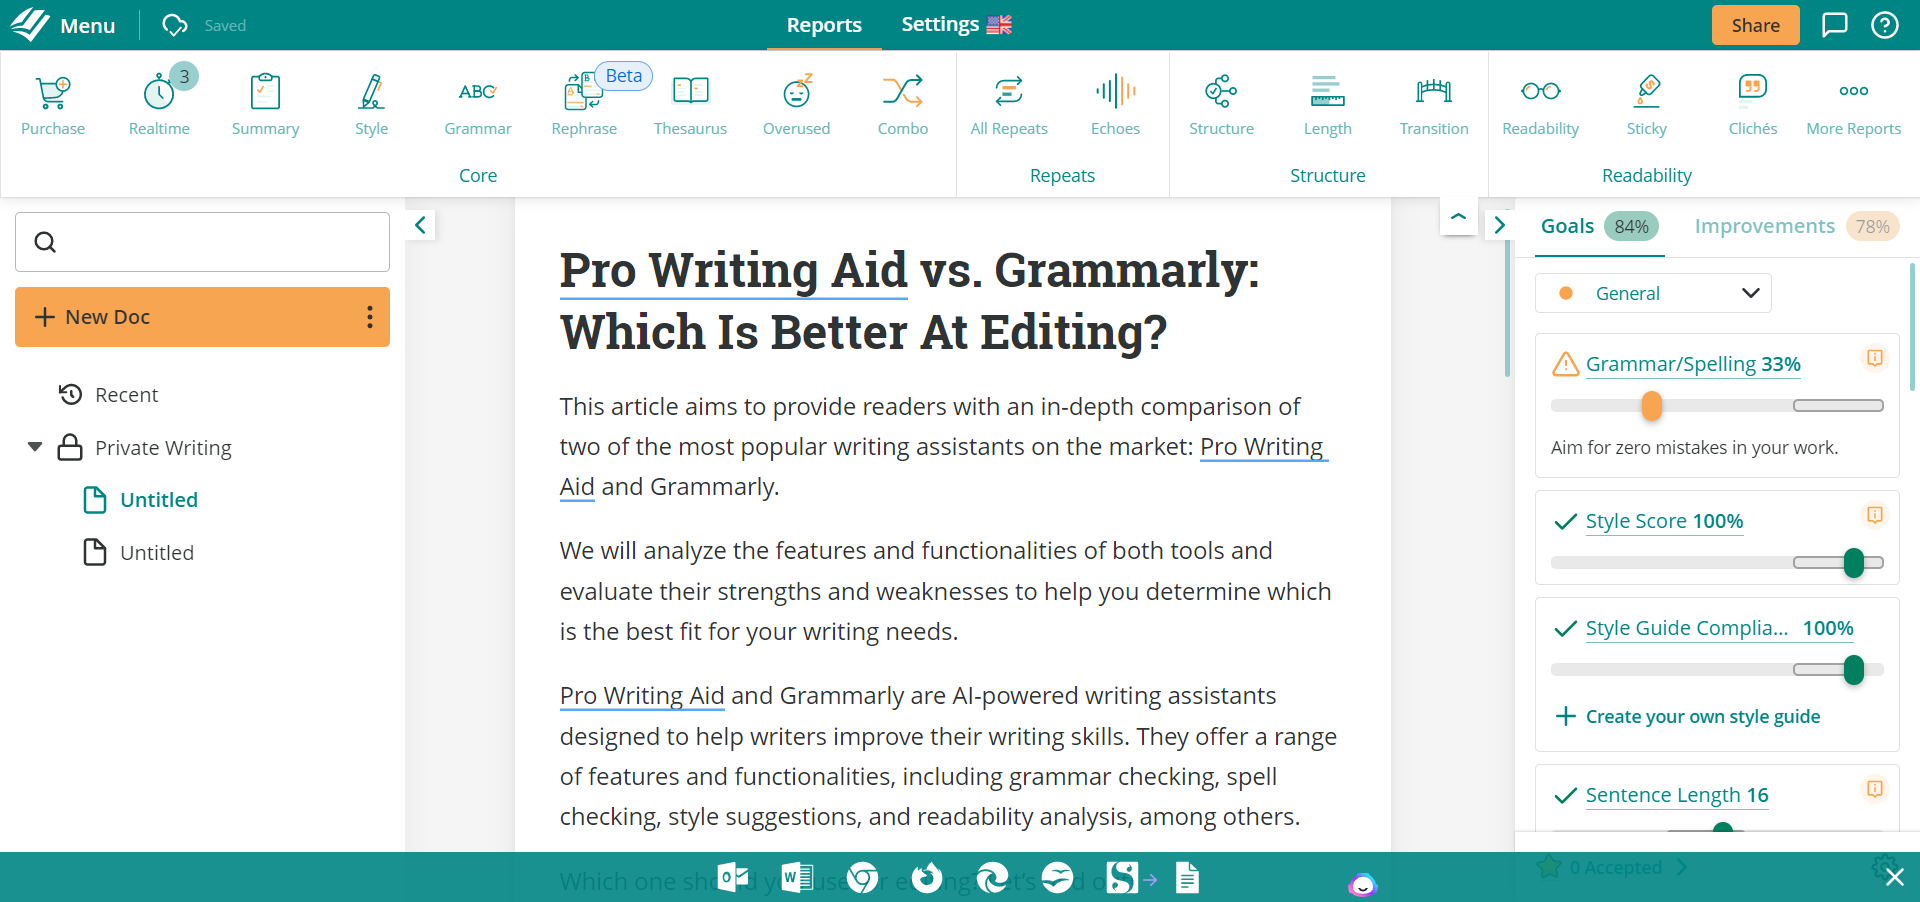 Pro Writing Aid real-time suggestions